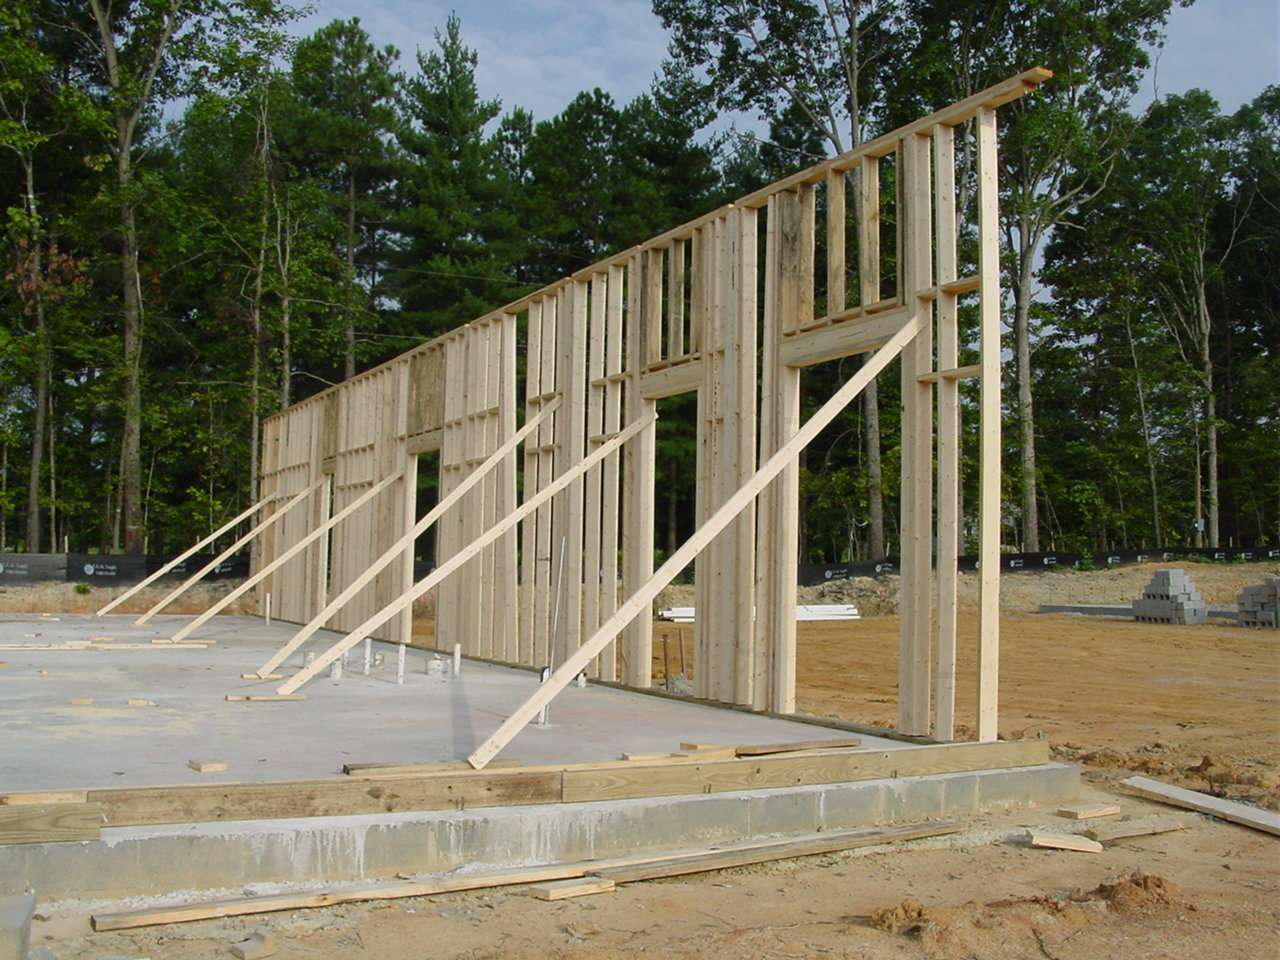 Structure being built